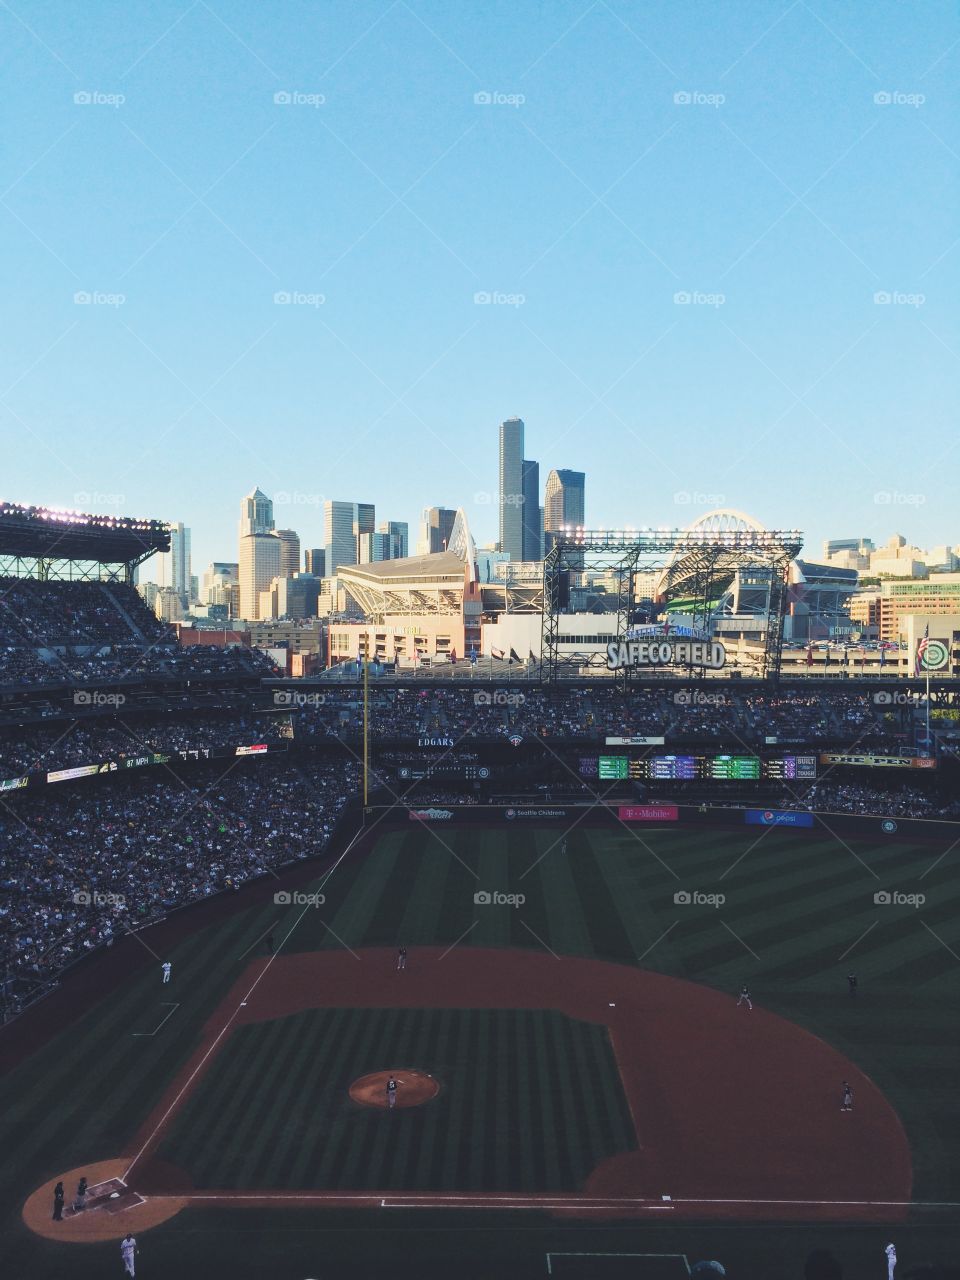 Baseball Season. Seattle Mariners Baseball Game with cityscape in background 